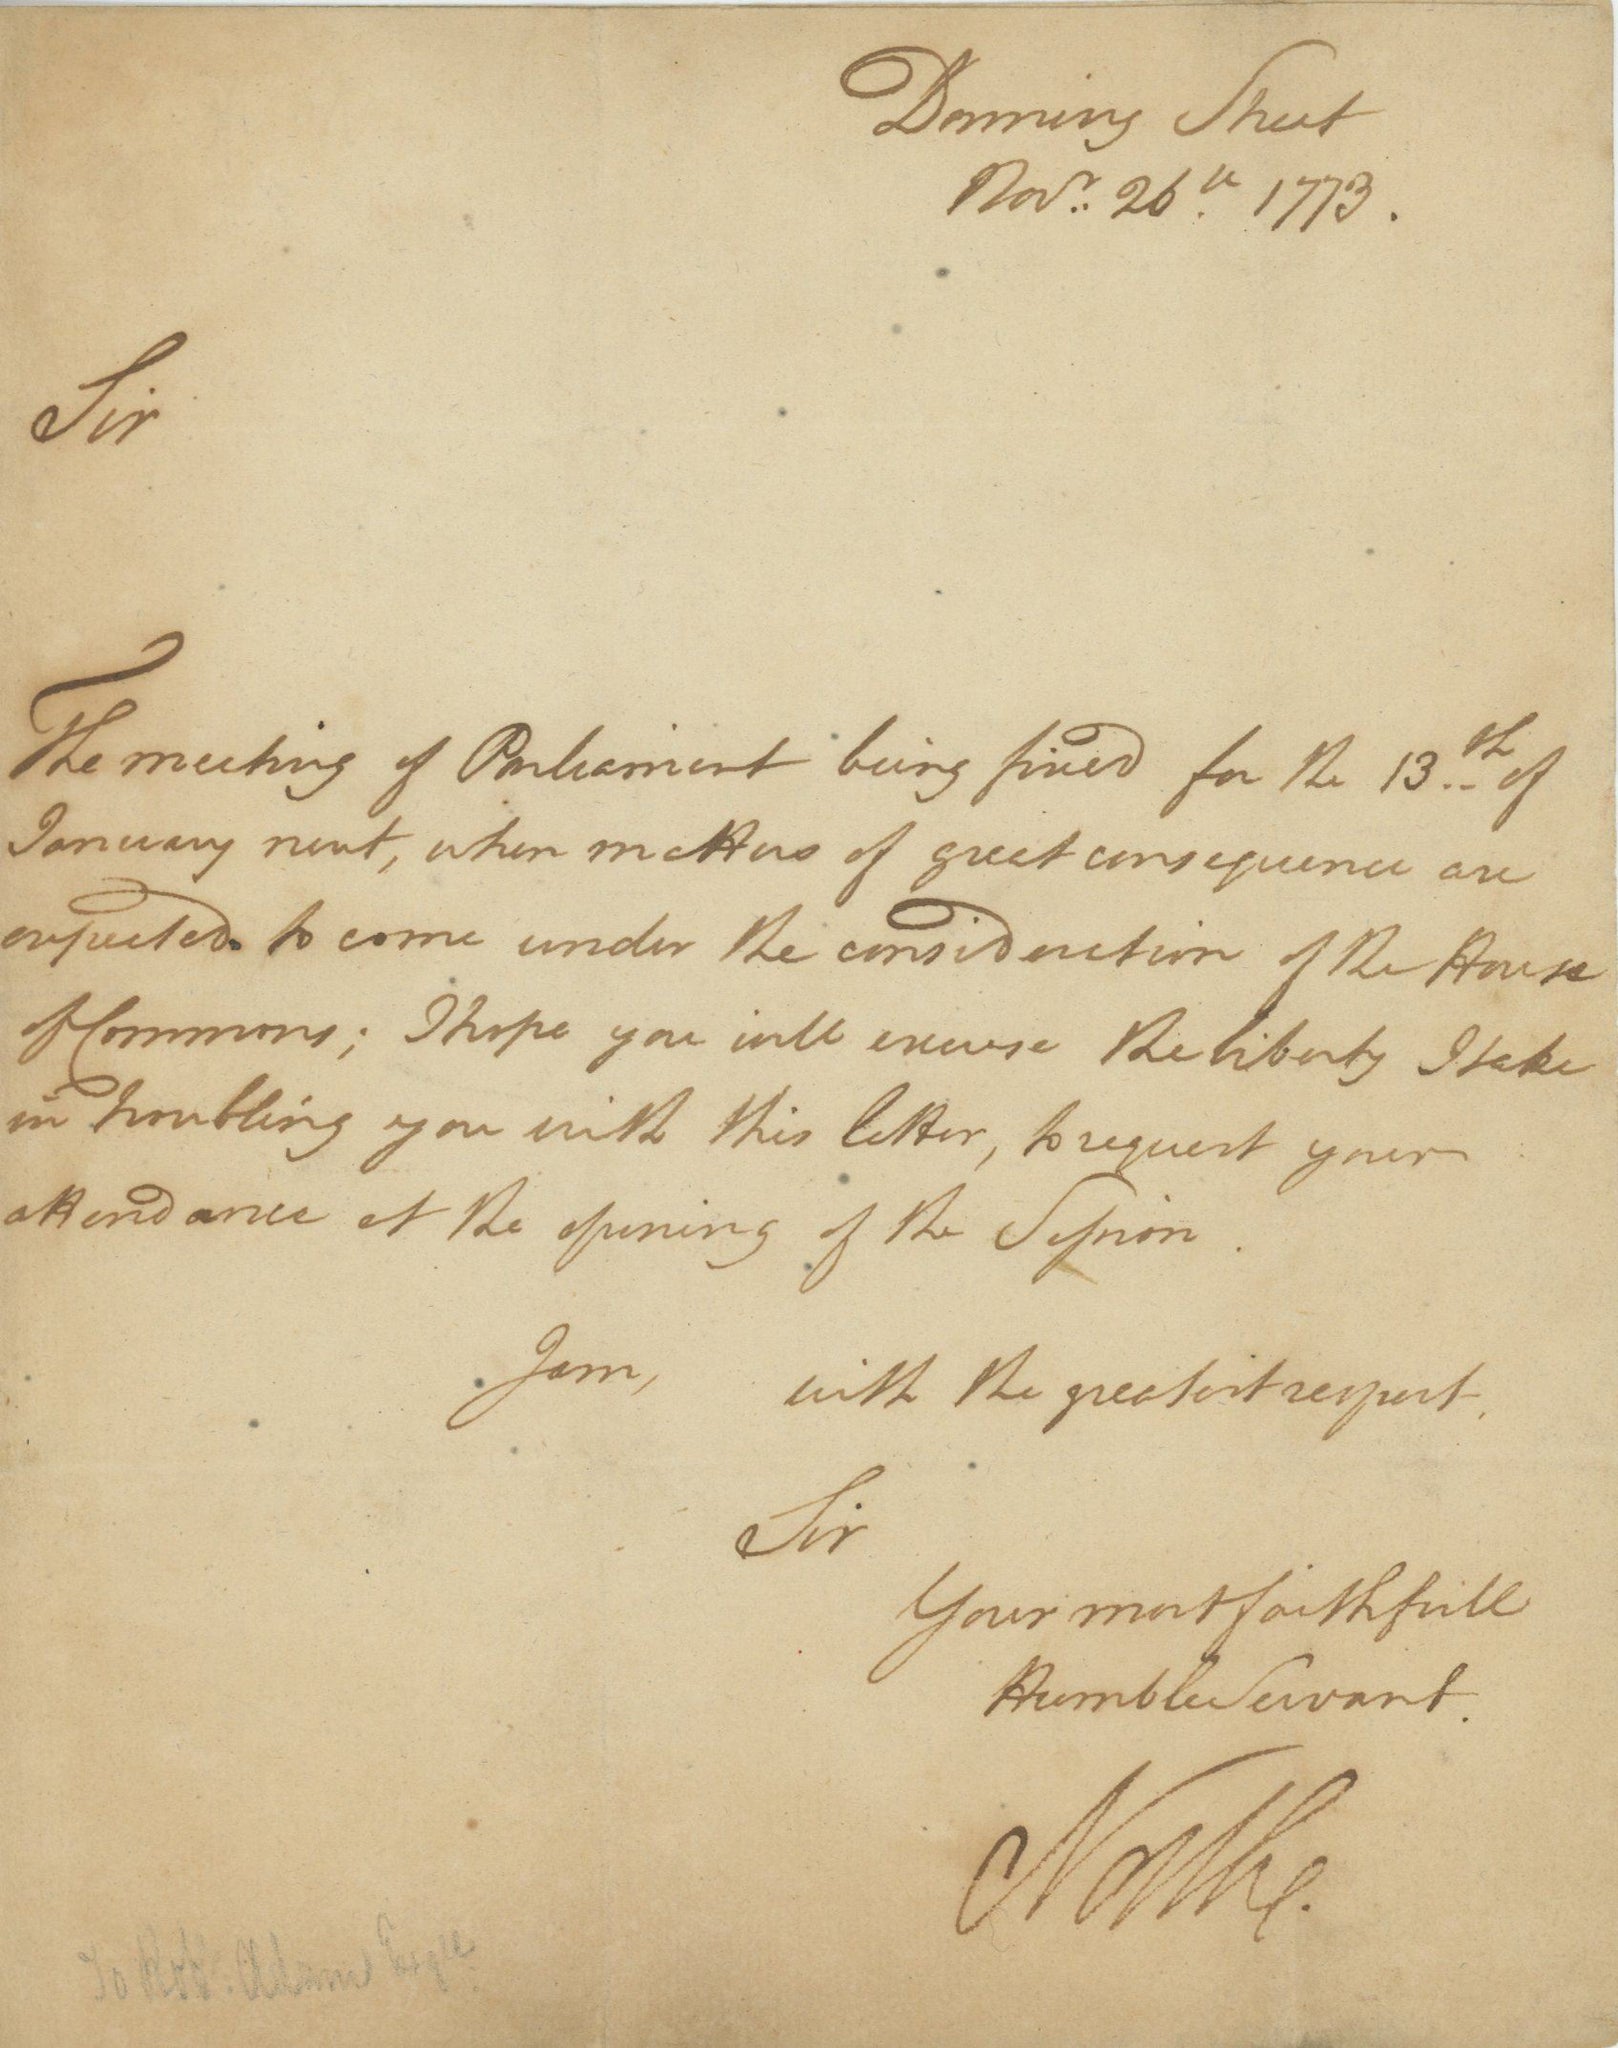 Lot 29:  FREDERICK NORTH - PRIME MINISTER OF THE GREAT BRITAIN - REVOLUTIONARY WAR RELATED 1774 LETTER (LS)